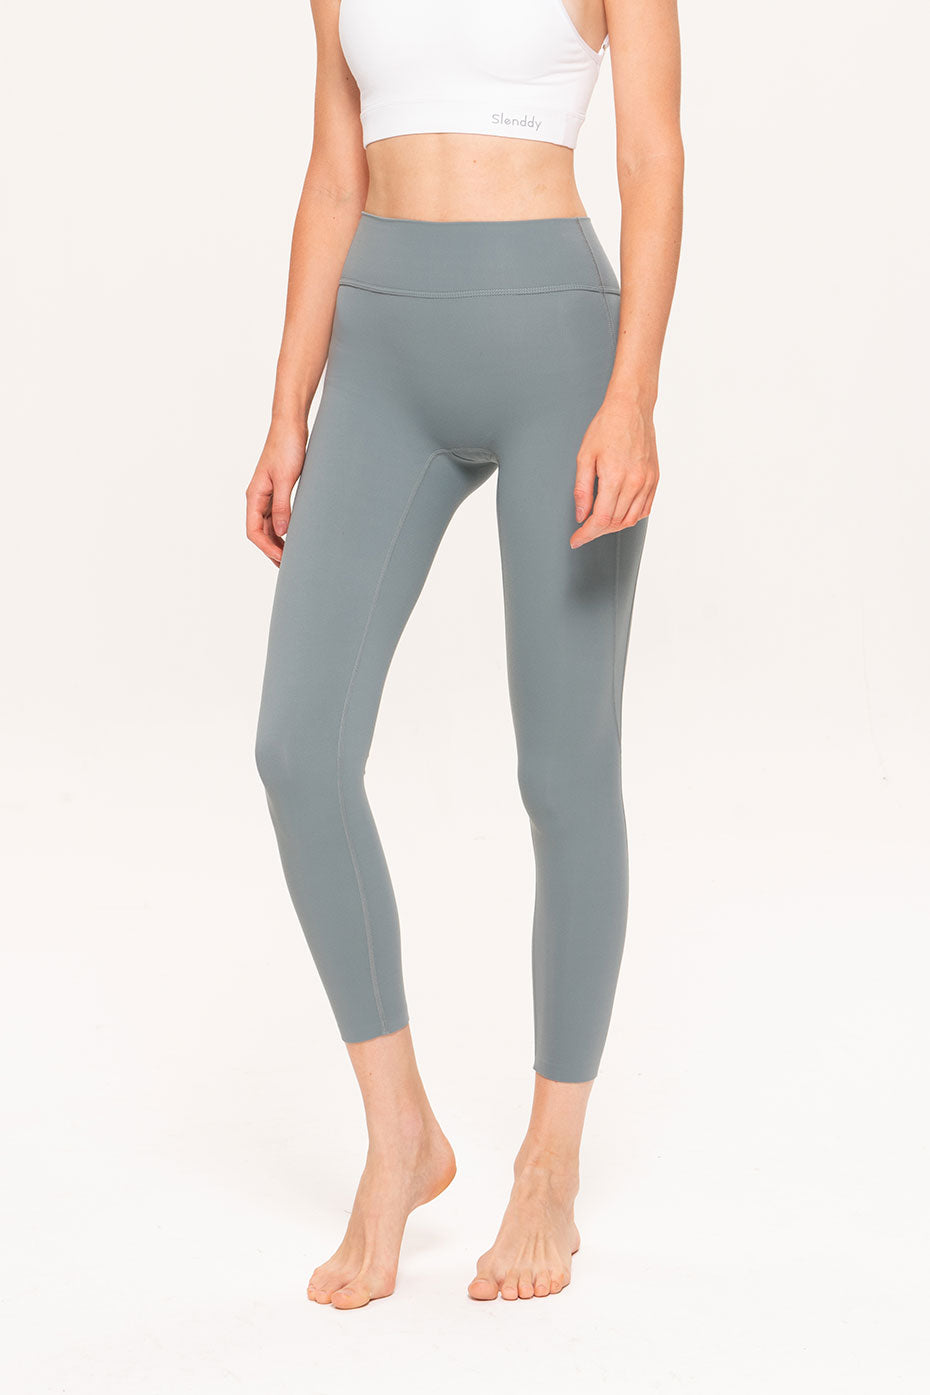 alo】Airlift High－Waist Suit Up Legging(505467525)